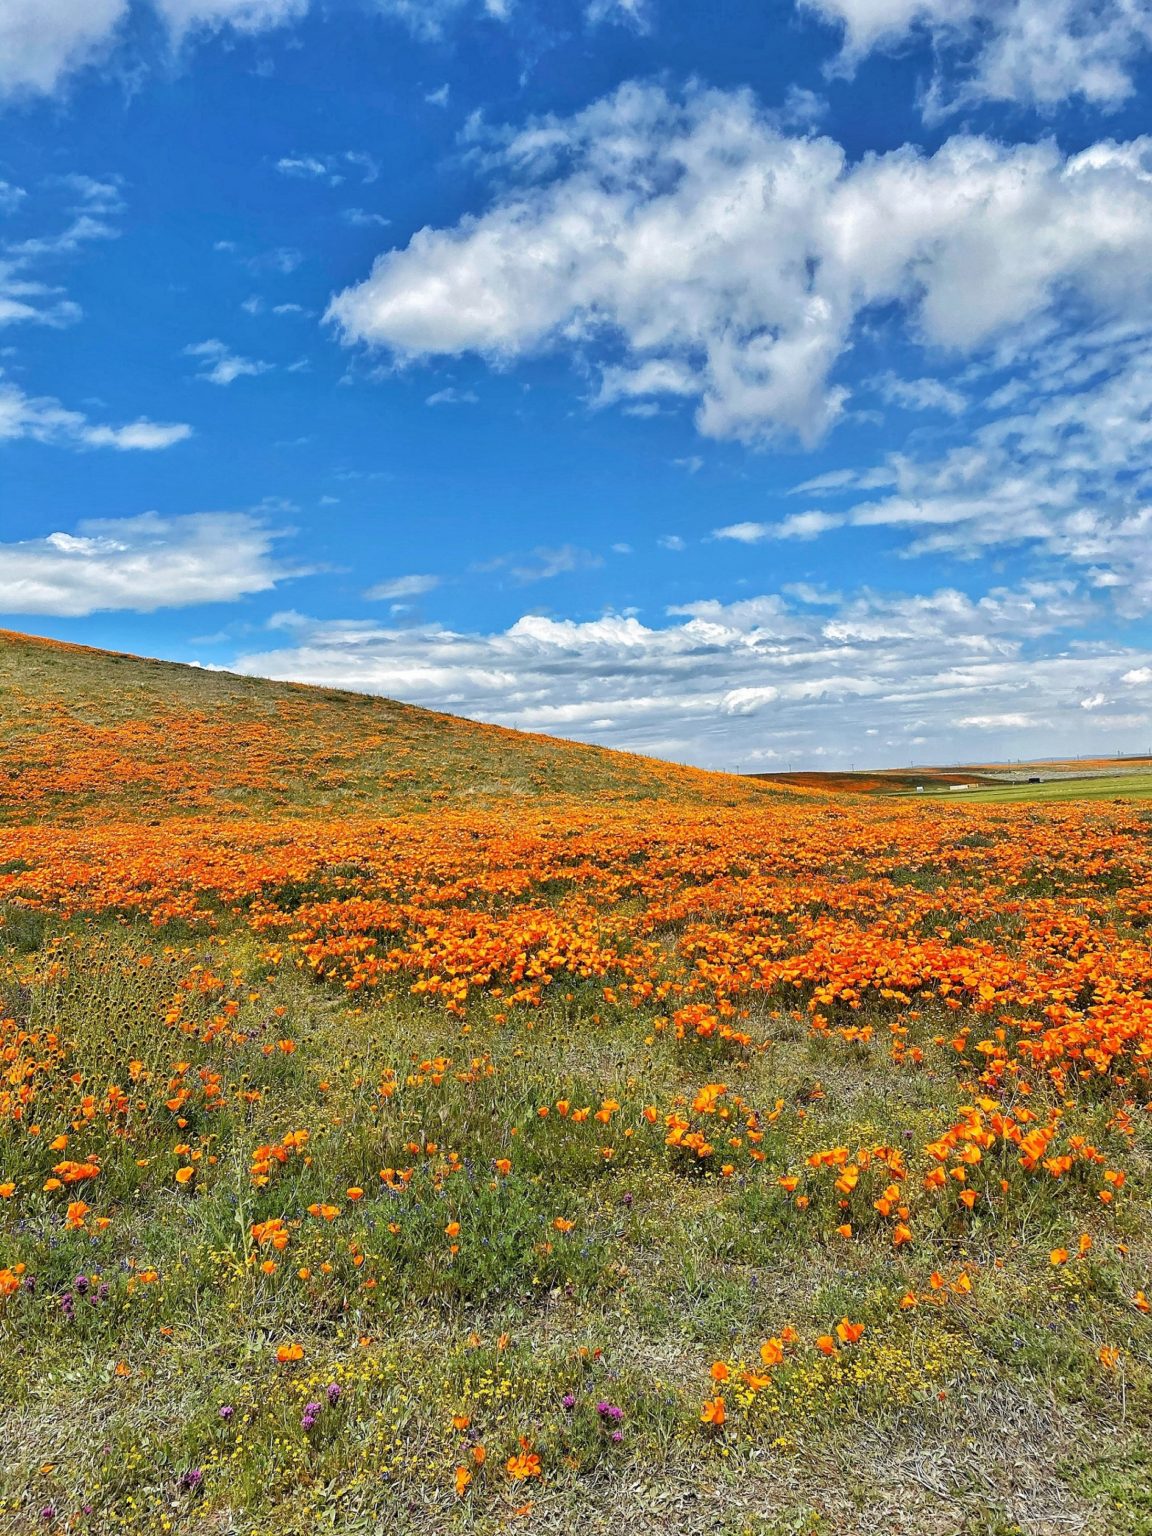 Antelope Valley California Poppy Reserve State Natural Reserve in